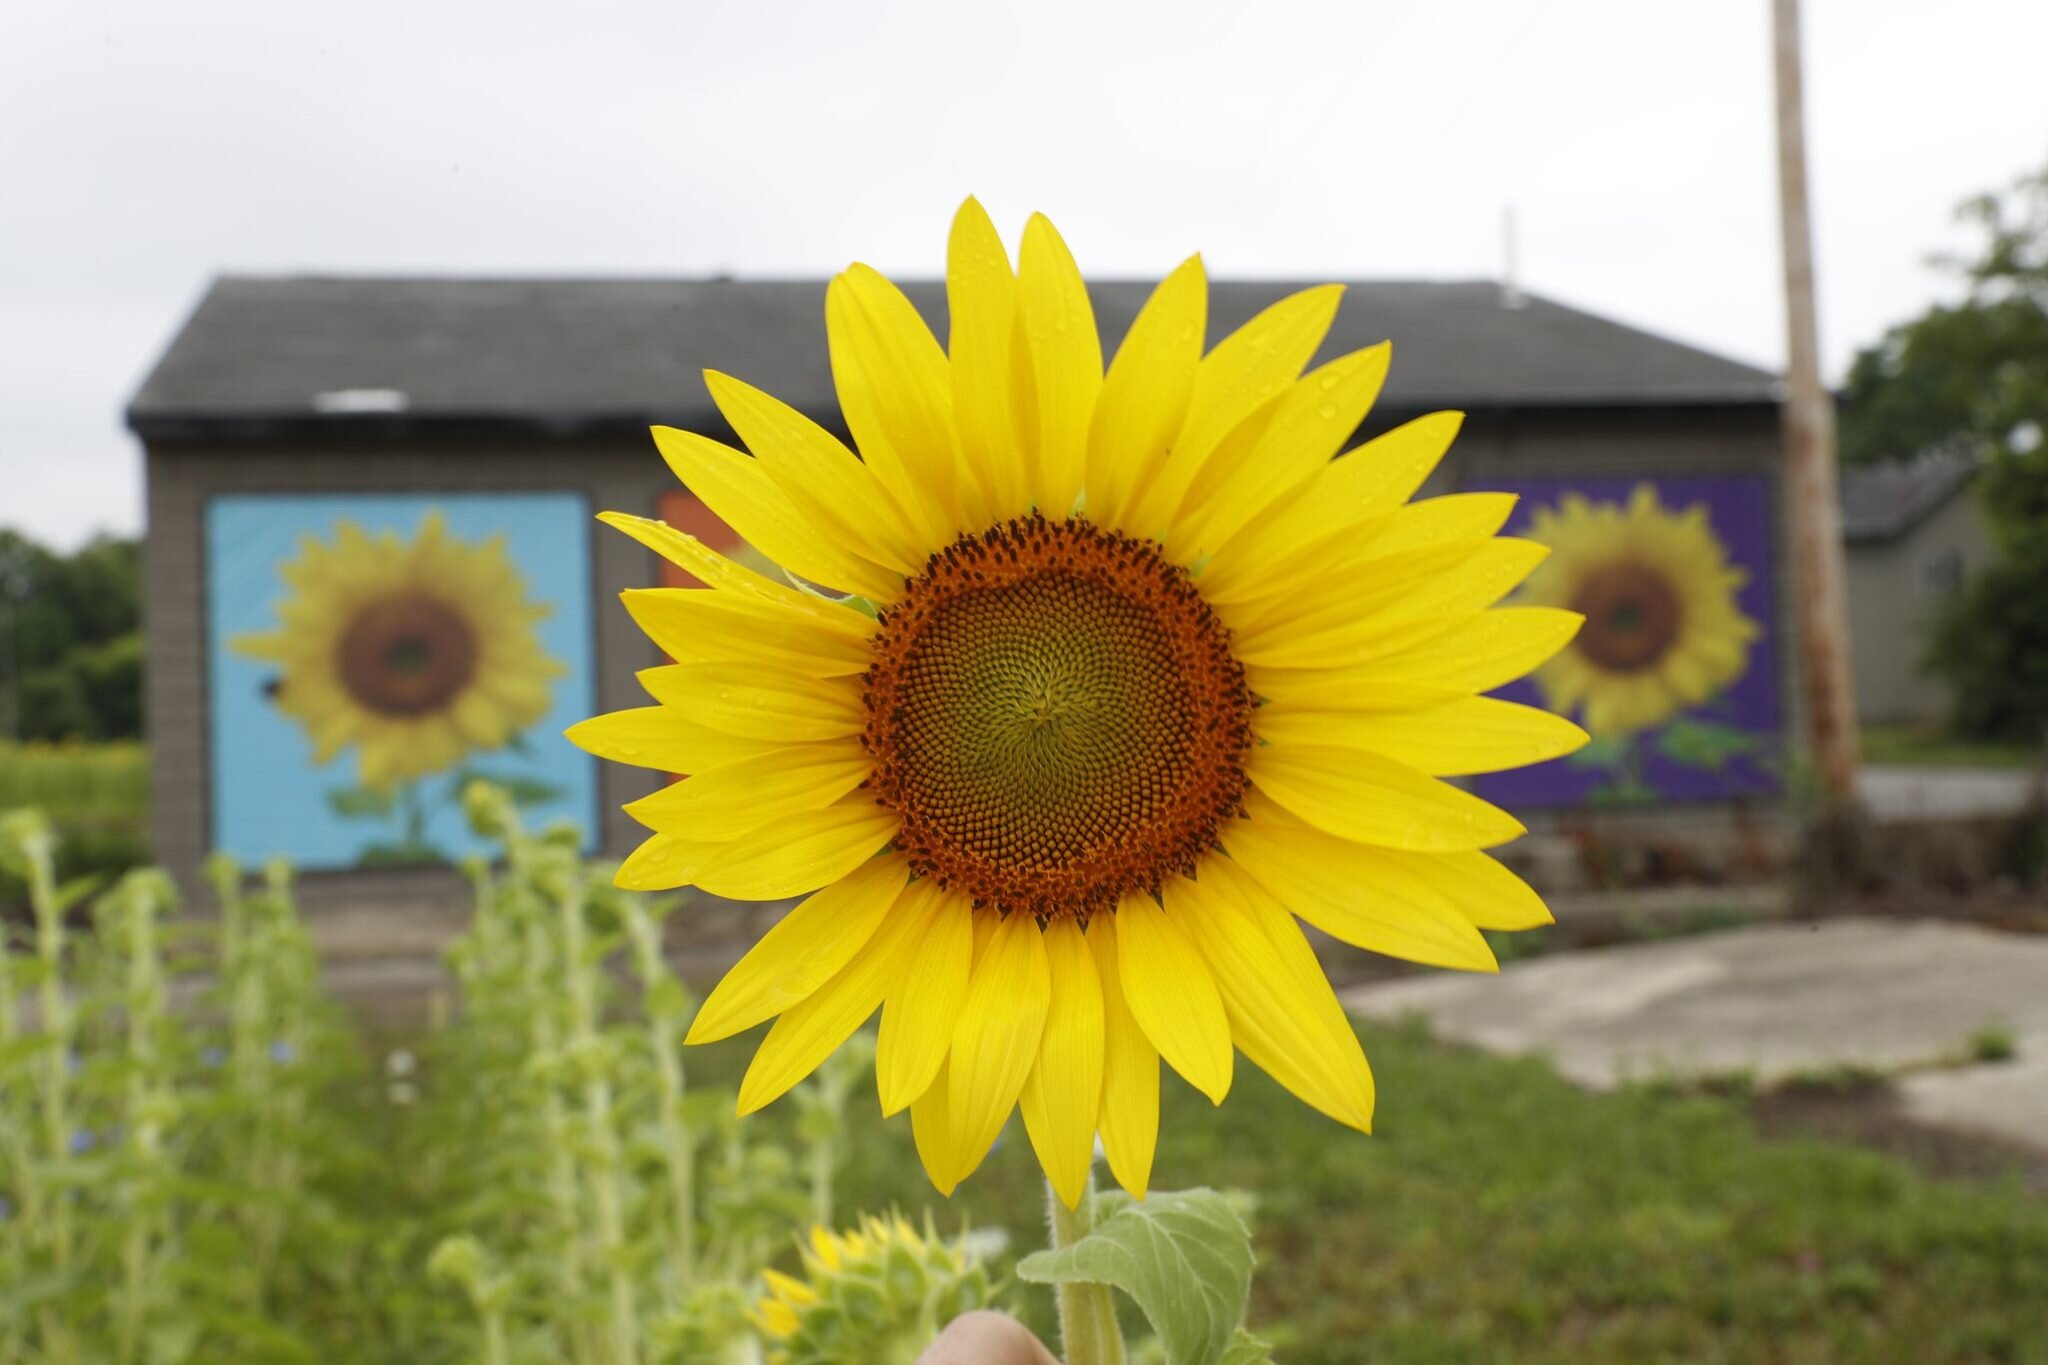 With the Sunflower Recycling Project, community members can help Keep Clark County Beautiful by collecting seeds to be replanted in the sunflower field next year. 